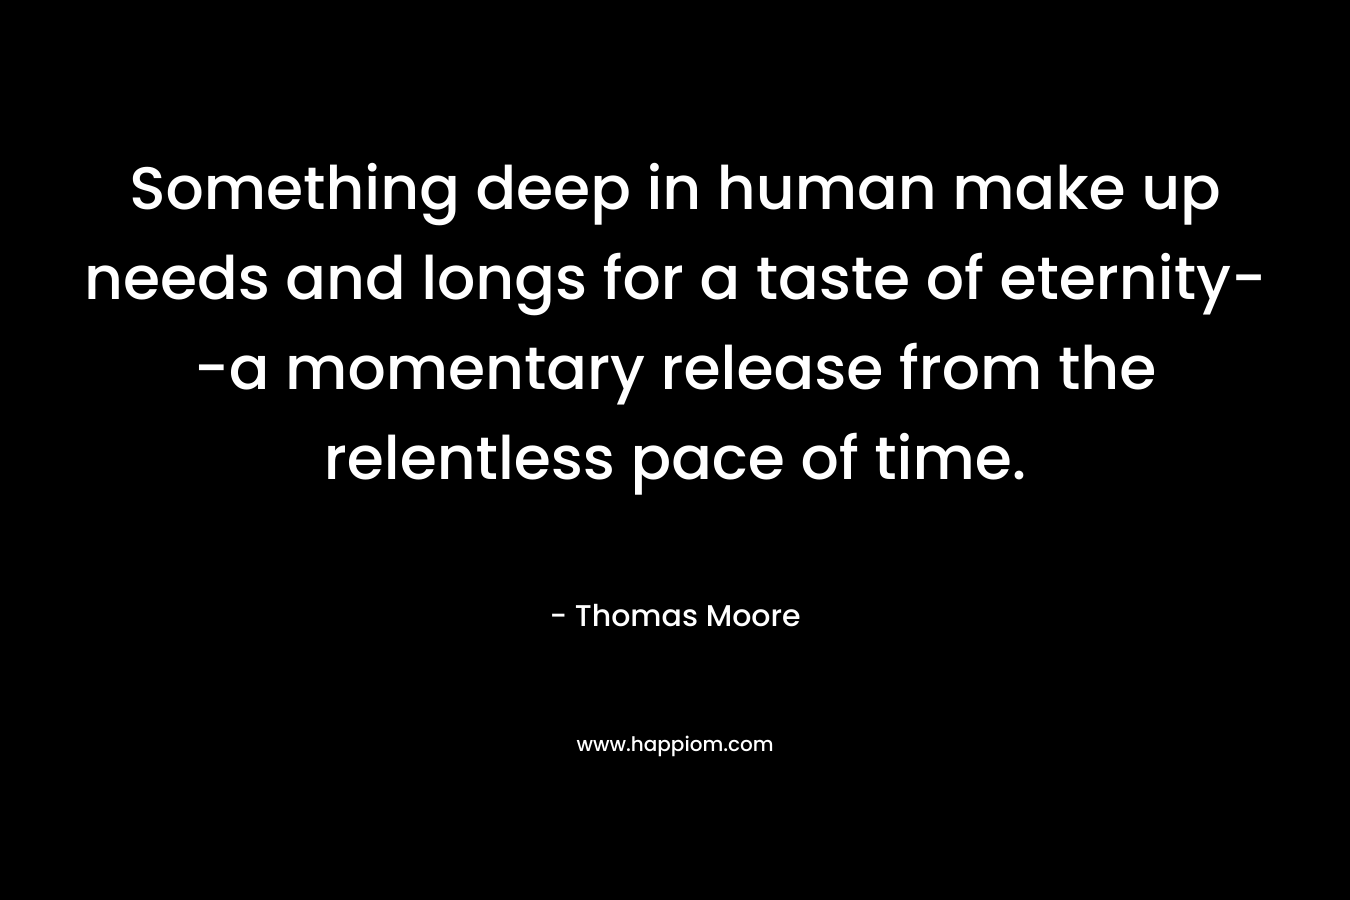 Something deep in human make up needs and longs for a taste of eternity--a momentary release from the relentless pace of time.